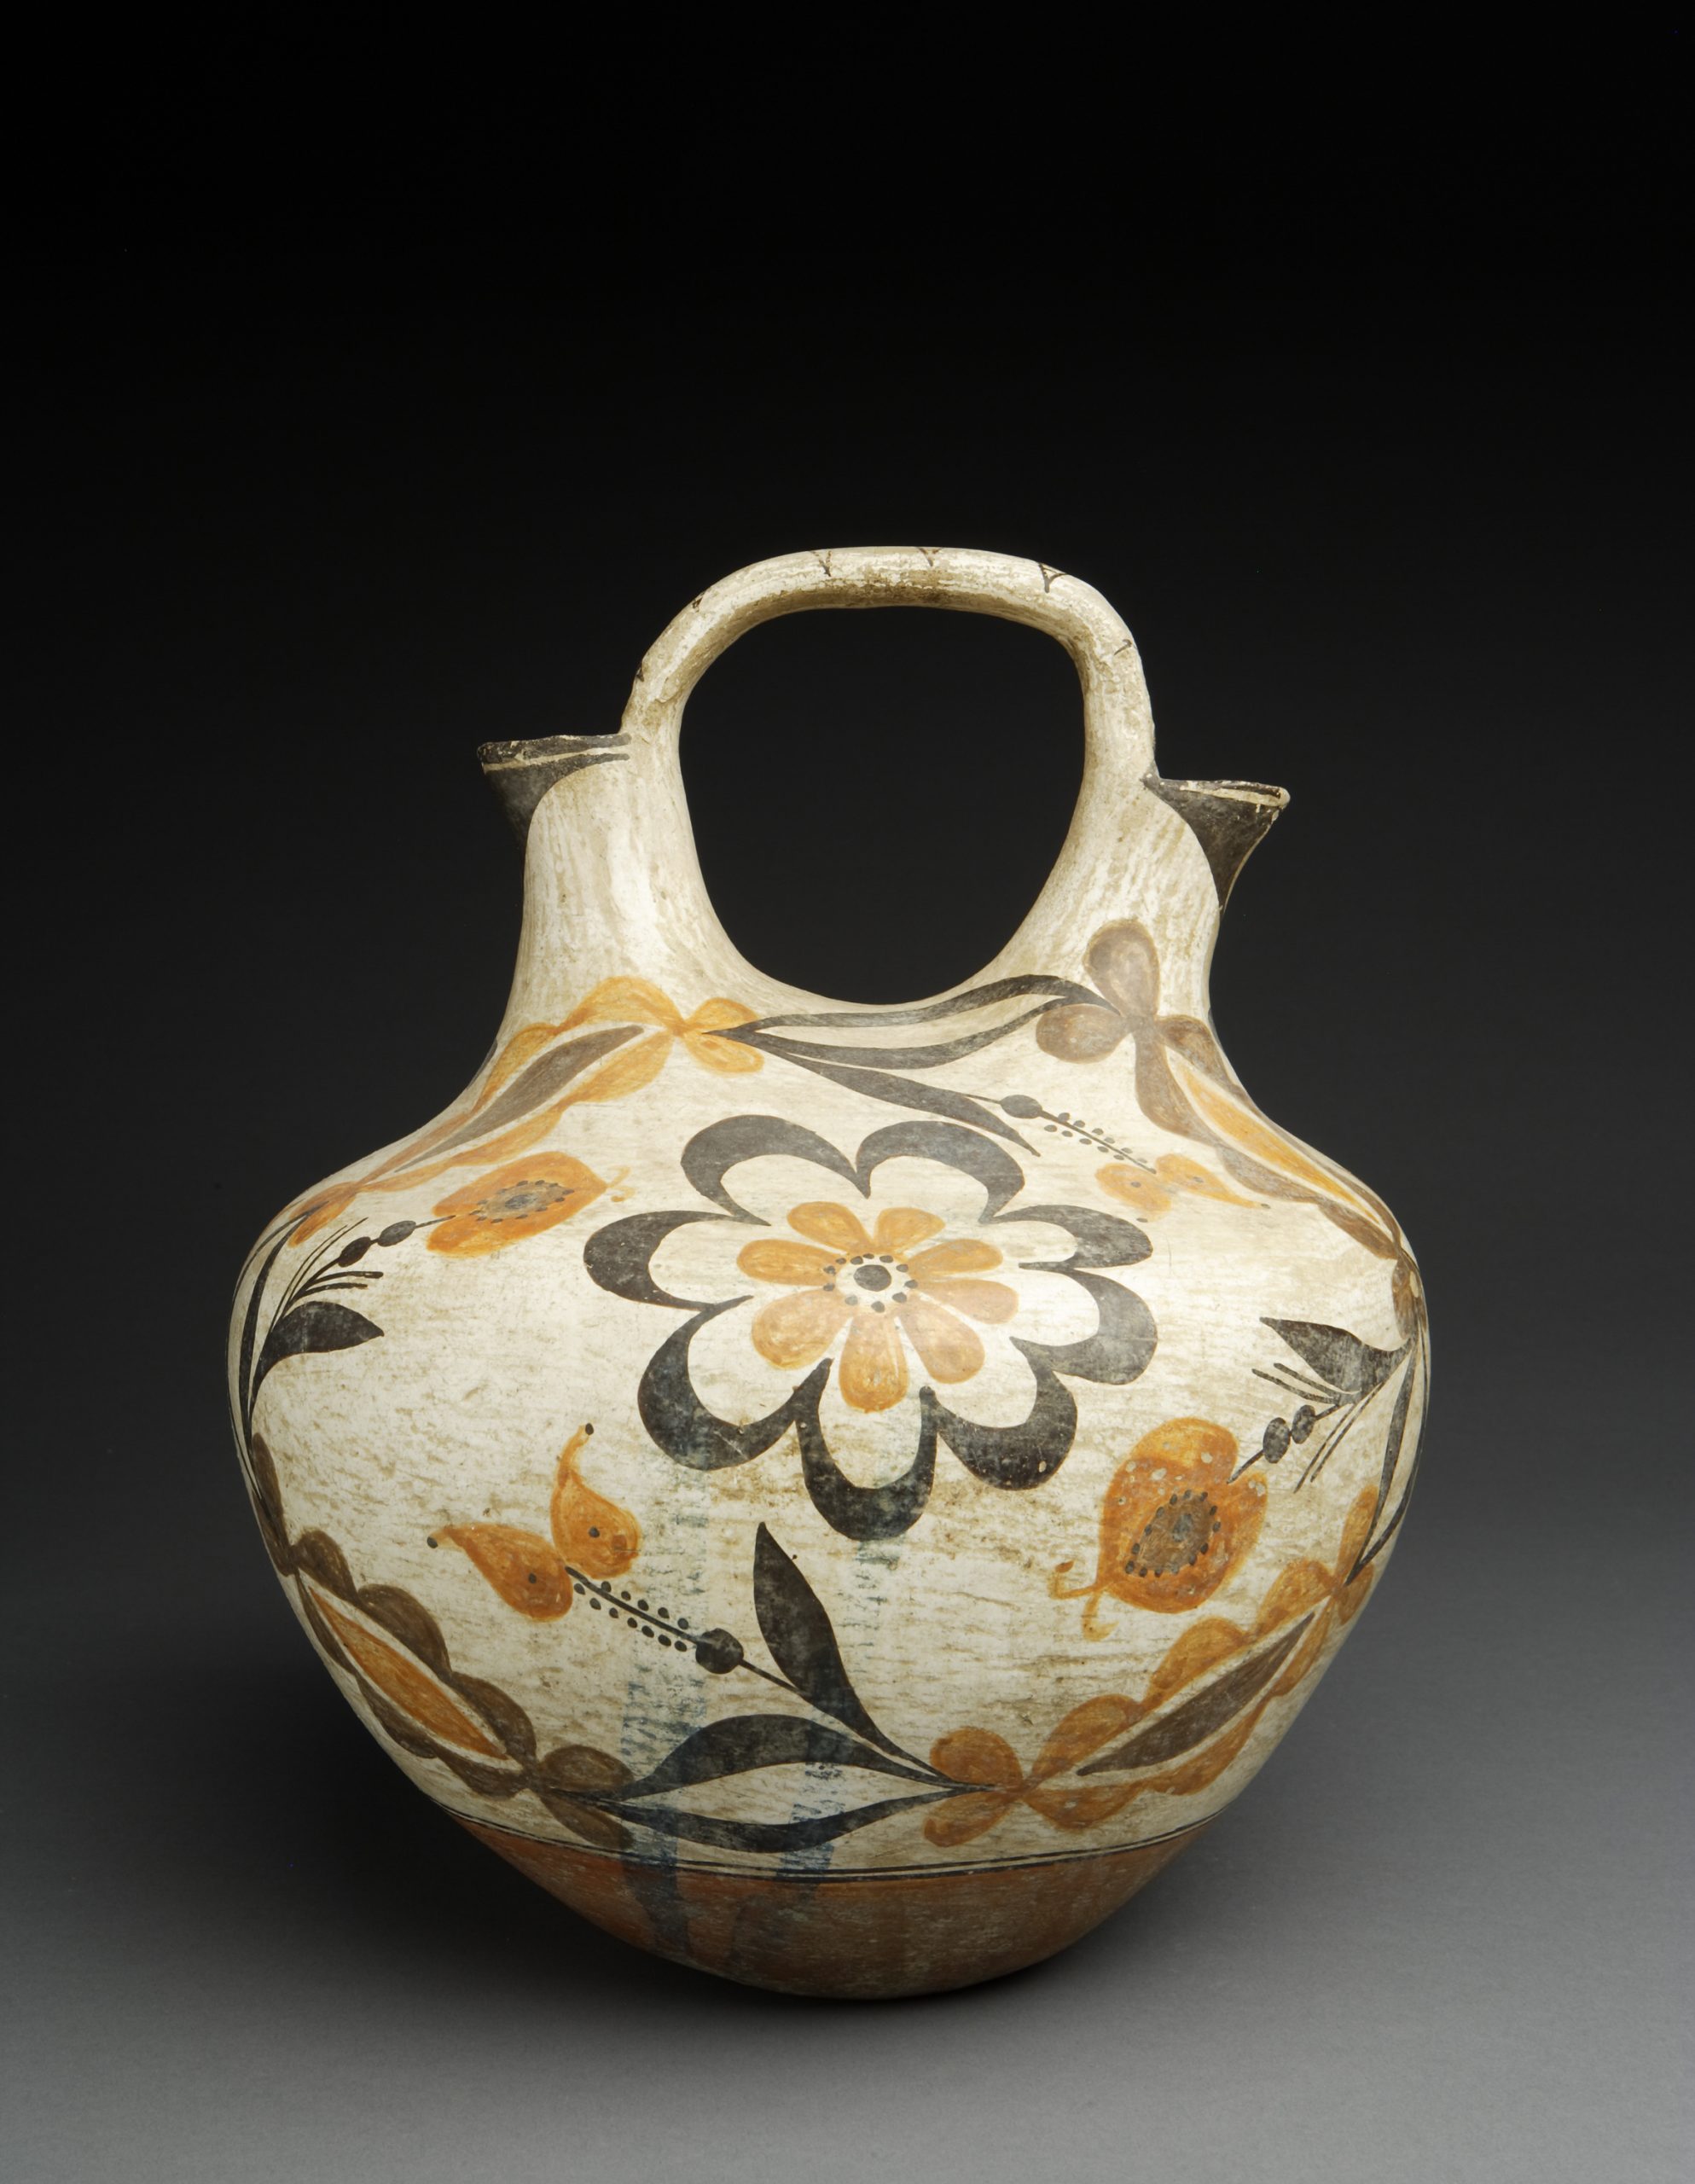 Wedding Vase, Artist unknown (Acoma Pueblo), 1900-1920, clay, paints, 13” x 11”. Cat. no. IAF.957. Photo by Addison Doty.